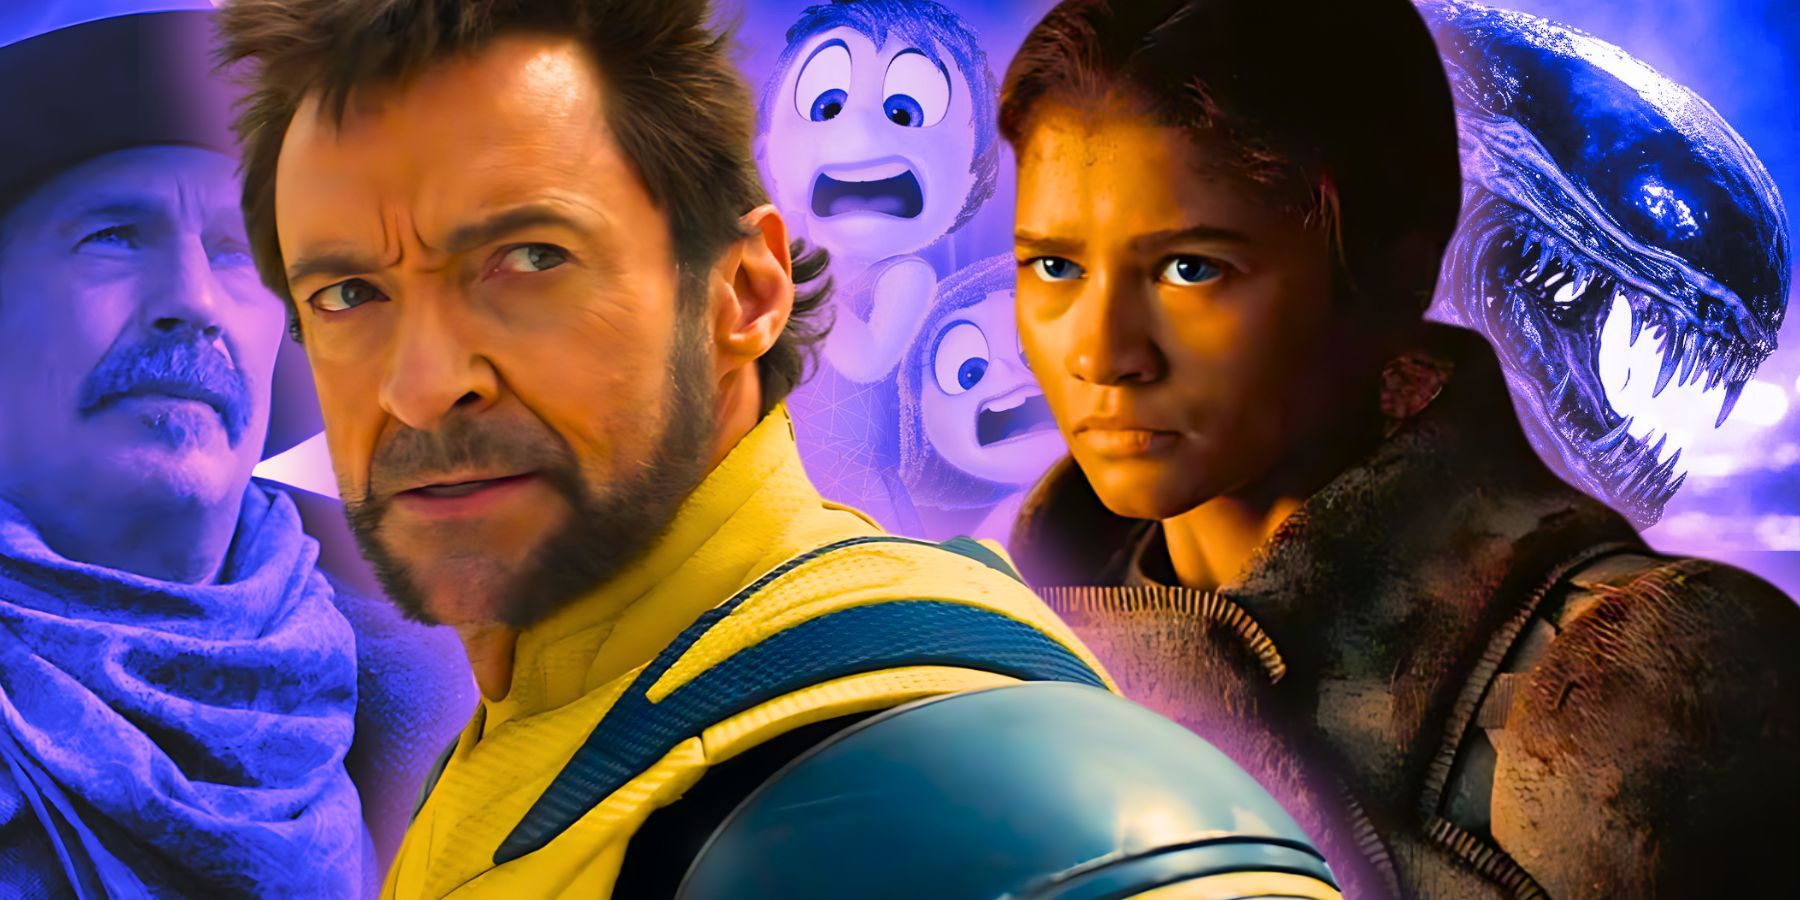 Hugh Jackman as Wolverine from Wolverine and Deadpool and Zendaya as Chani from Dune 2 with still from Horizon, Inside Out 2 and Alien - Romulus in the background